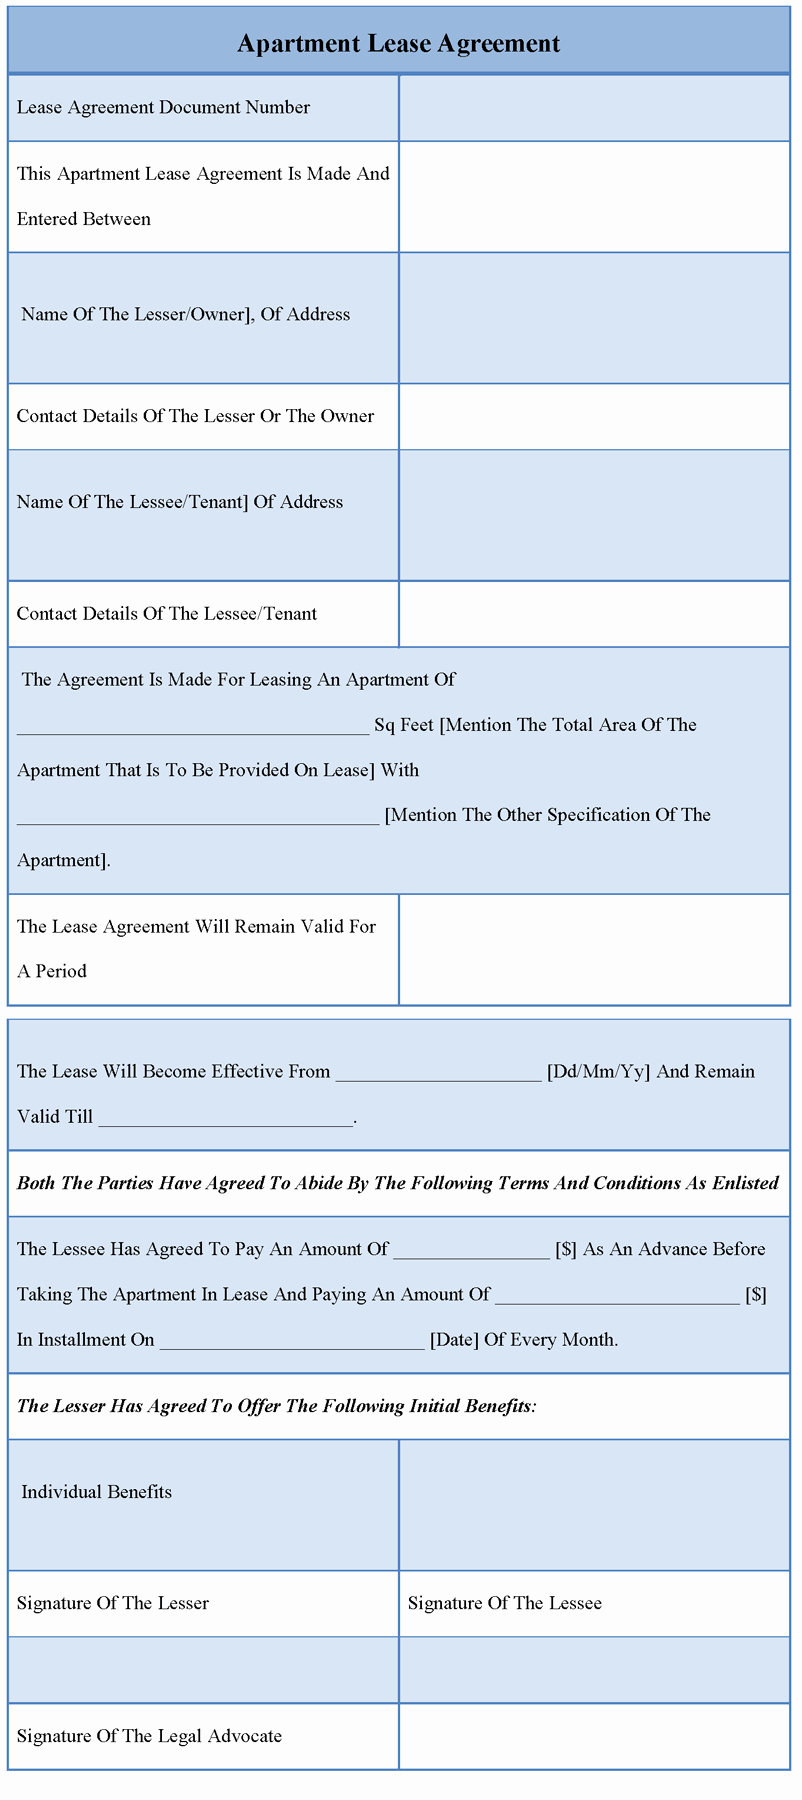 Printable Apartment Lease Agreement Template